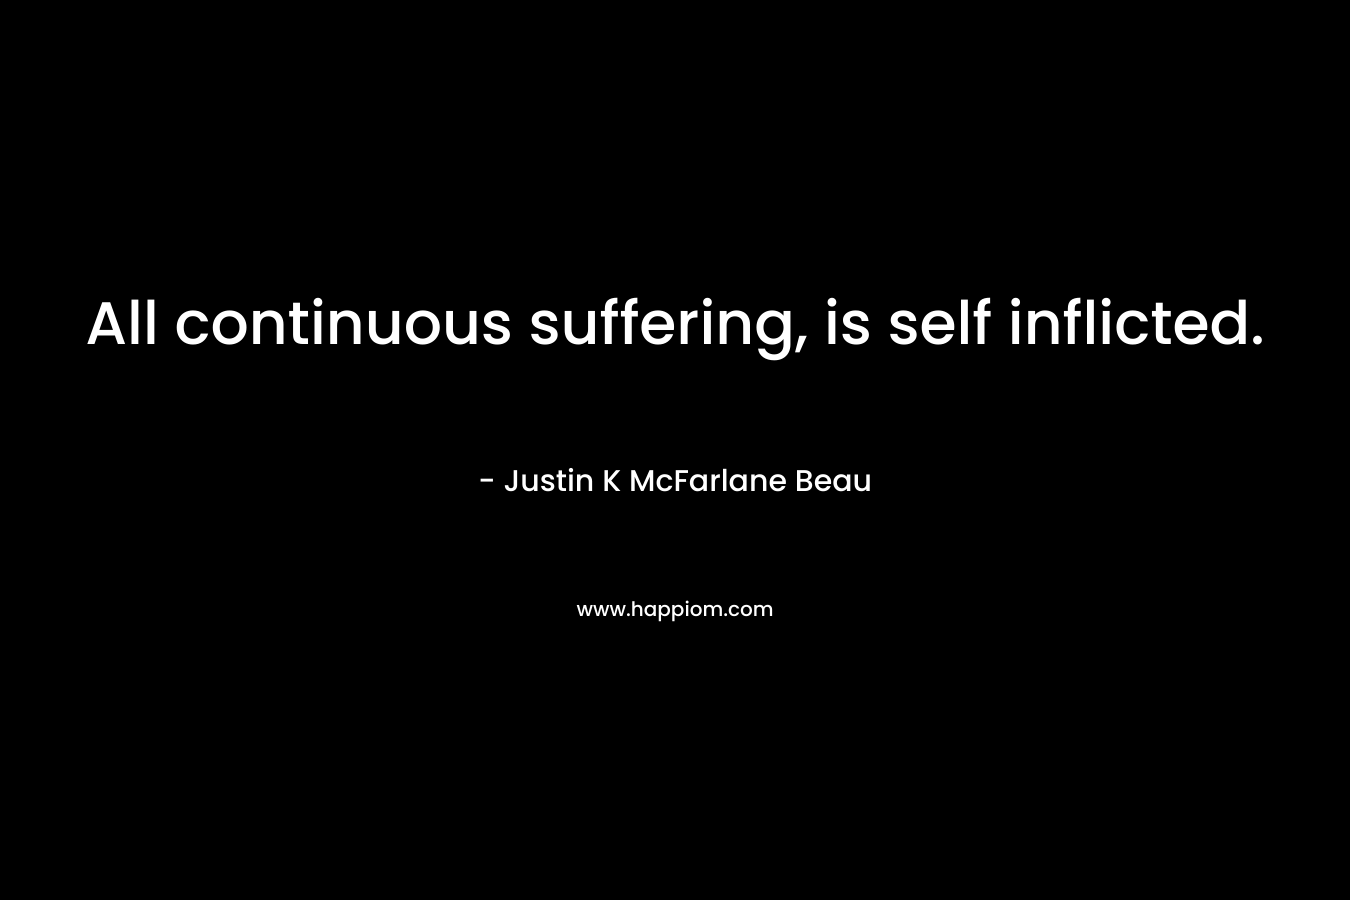 All continuous suffering, is self inflicted.